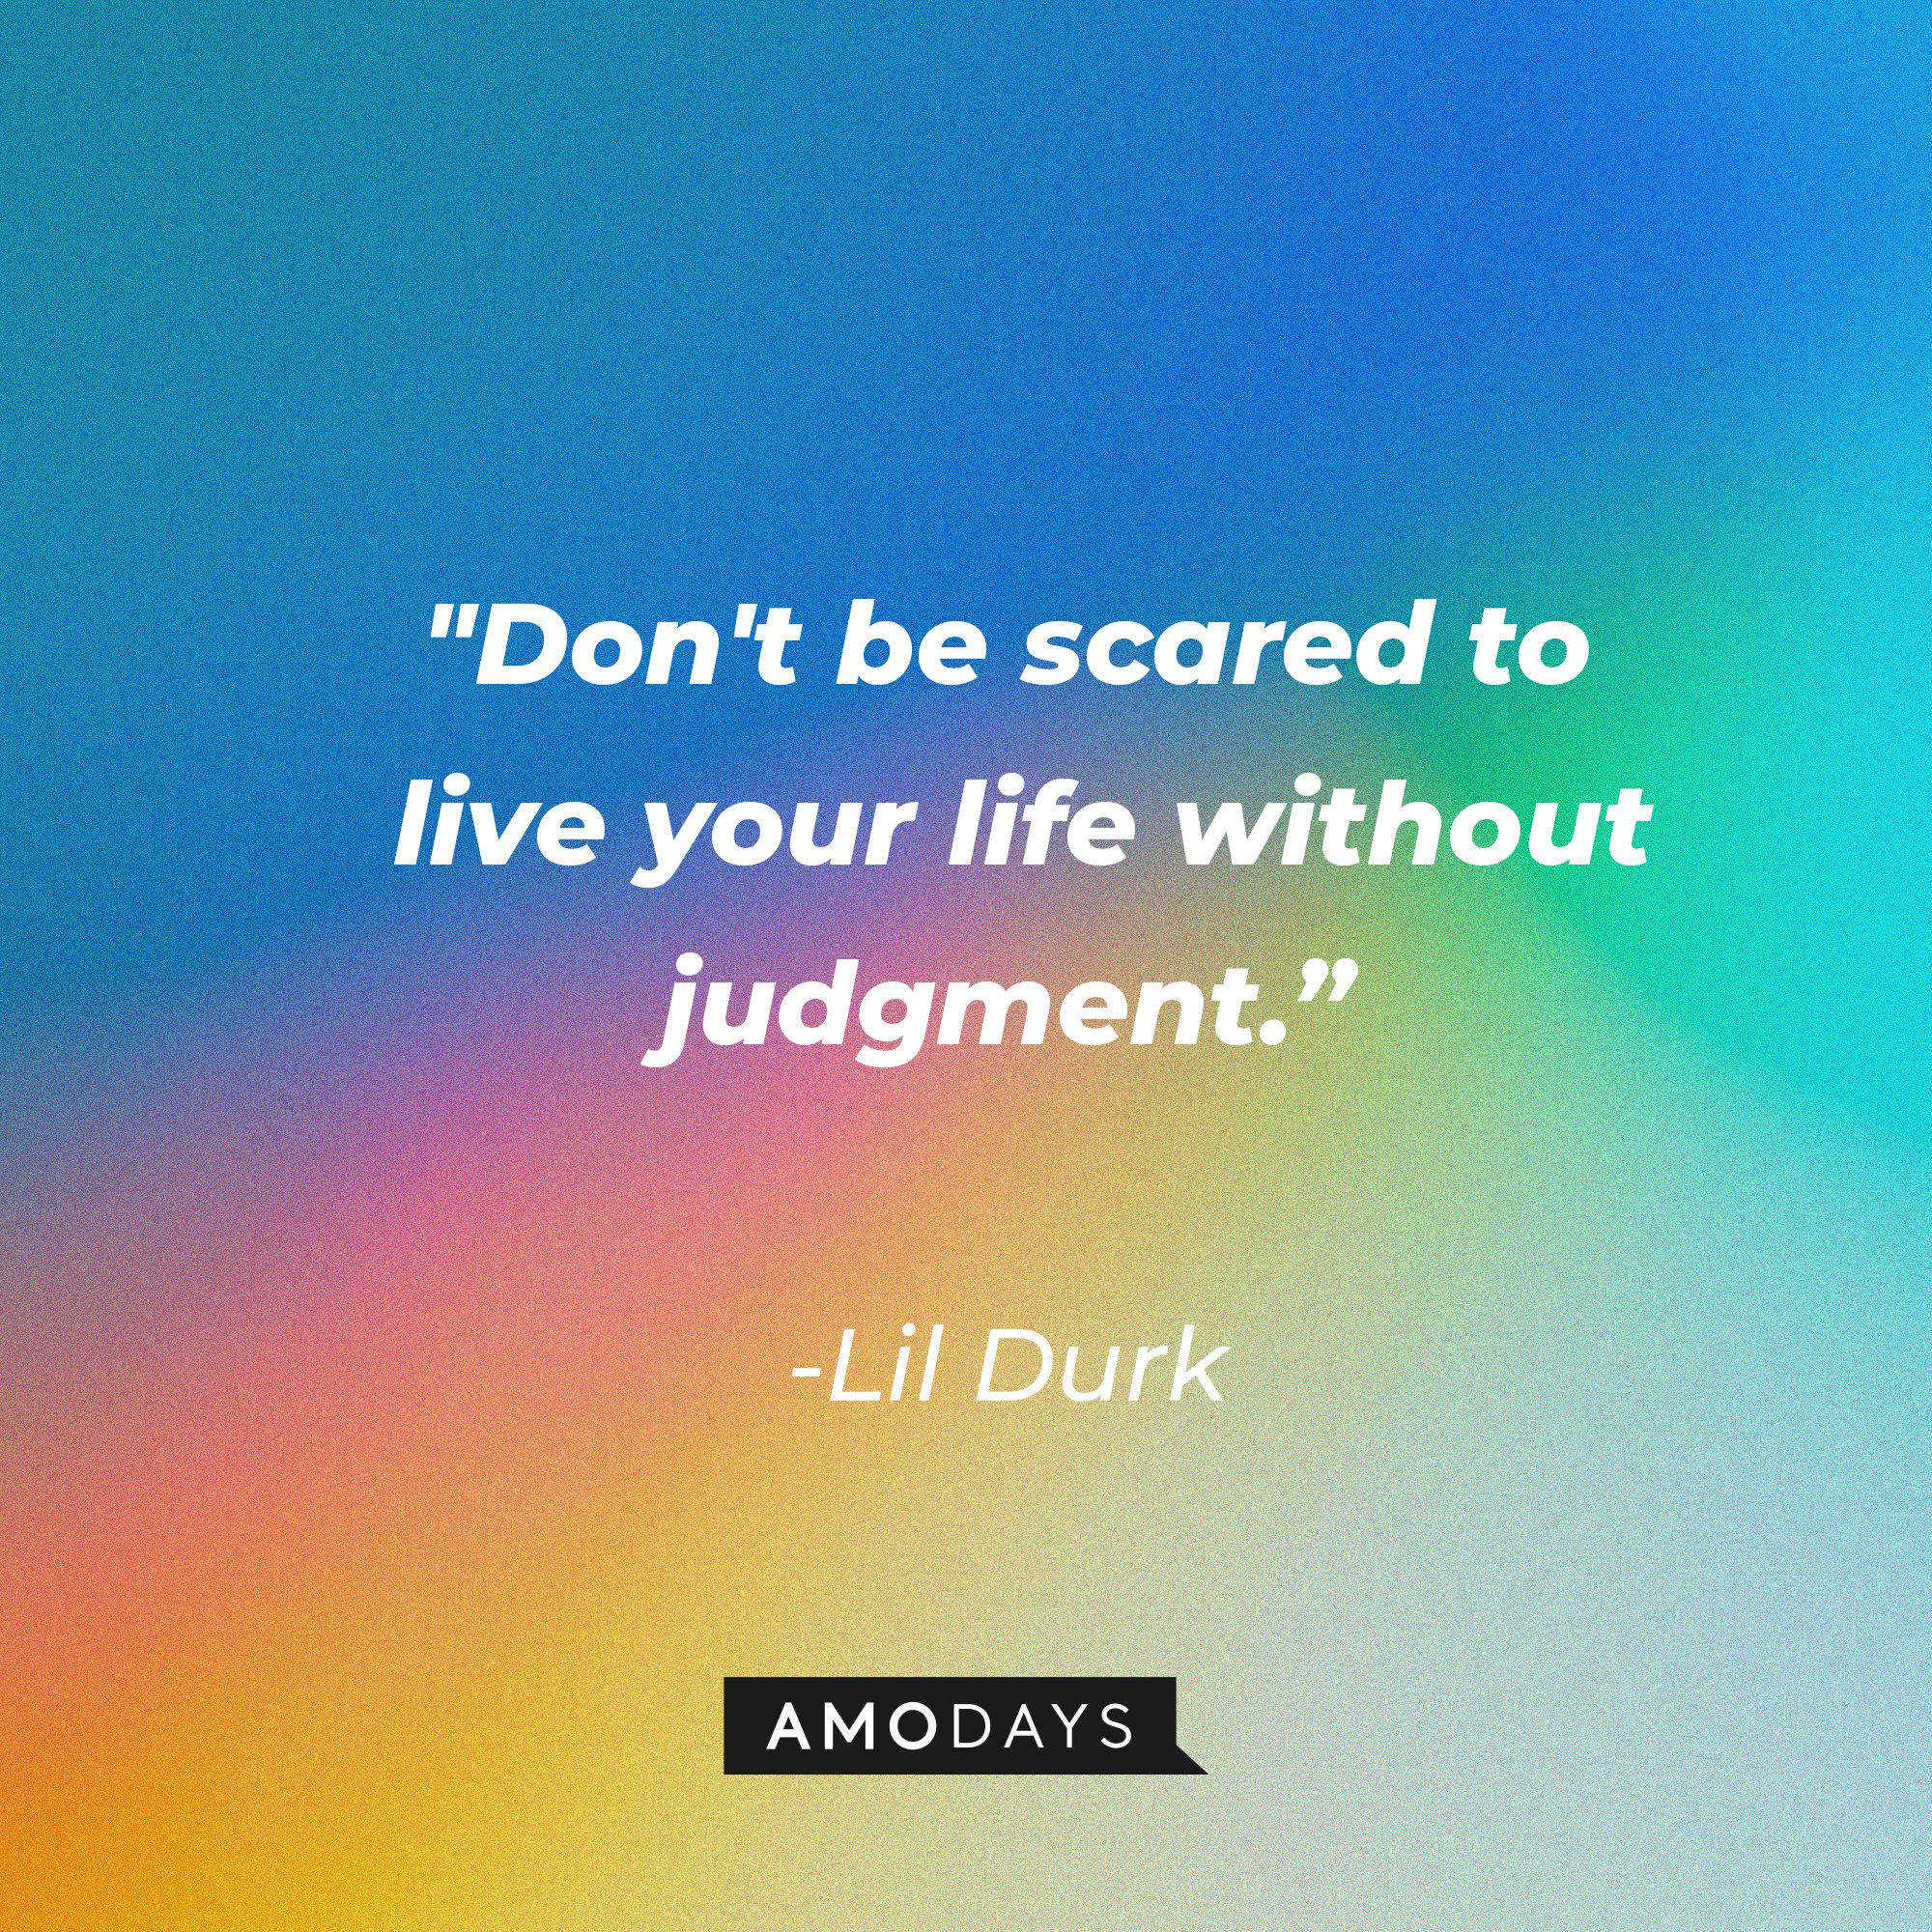 Lil Durk’s quote: "Don't be scared to live your life without judgment.” | Image: AmoDays 